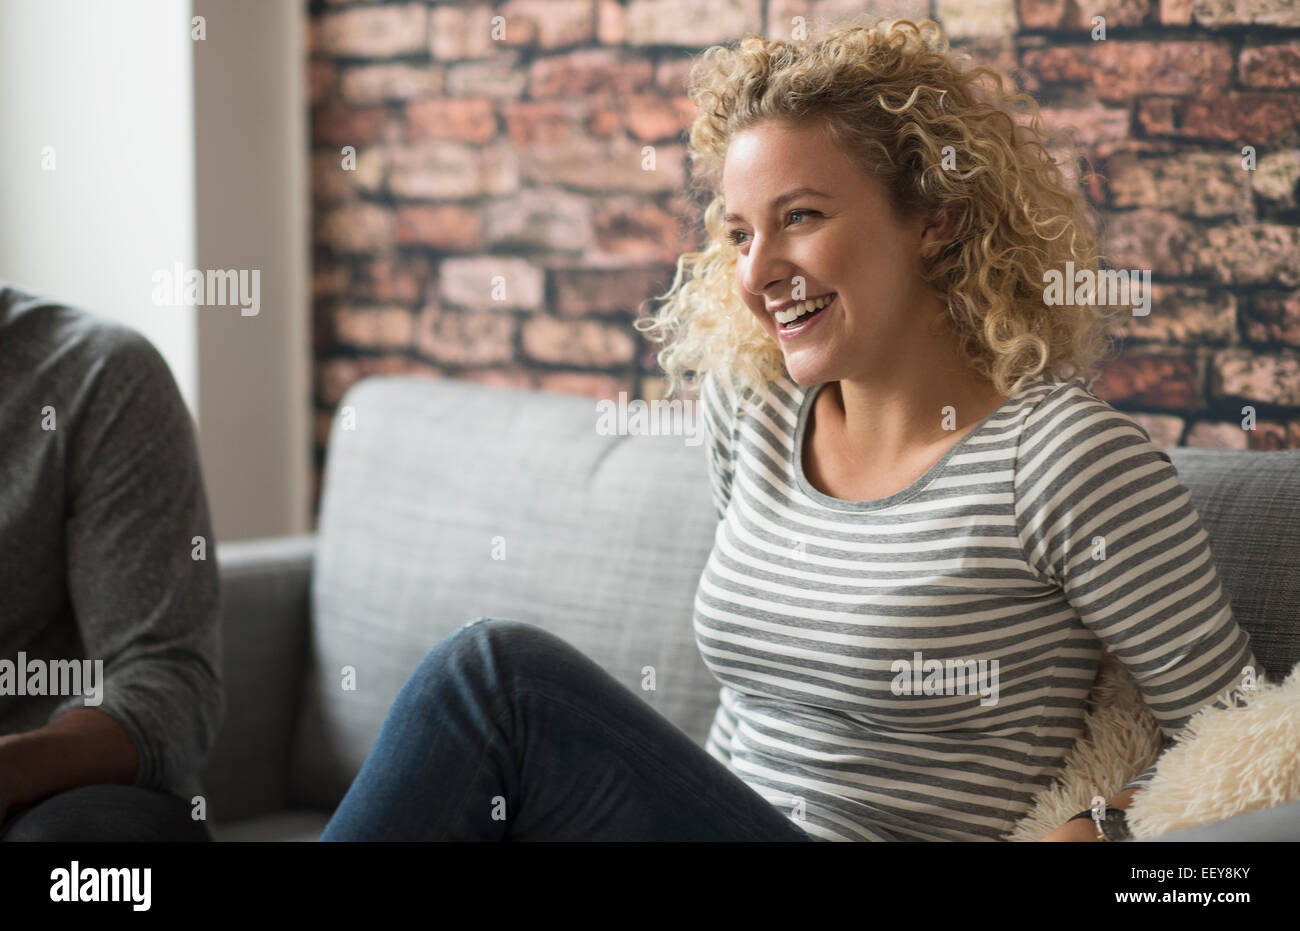 Blonde woman laughing on sofa Banque D'Images